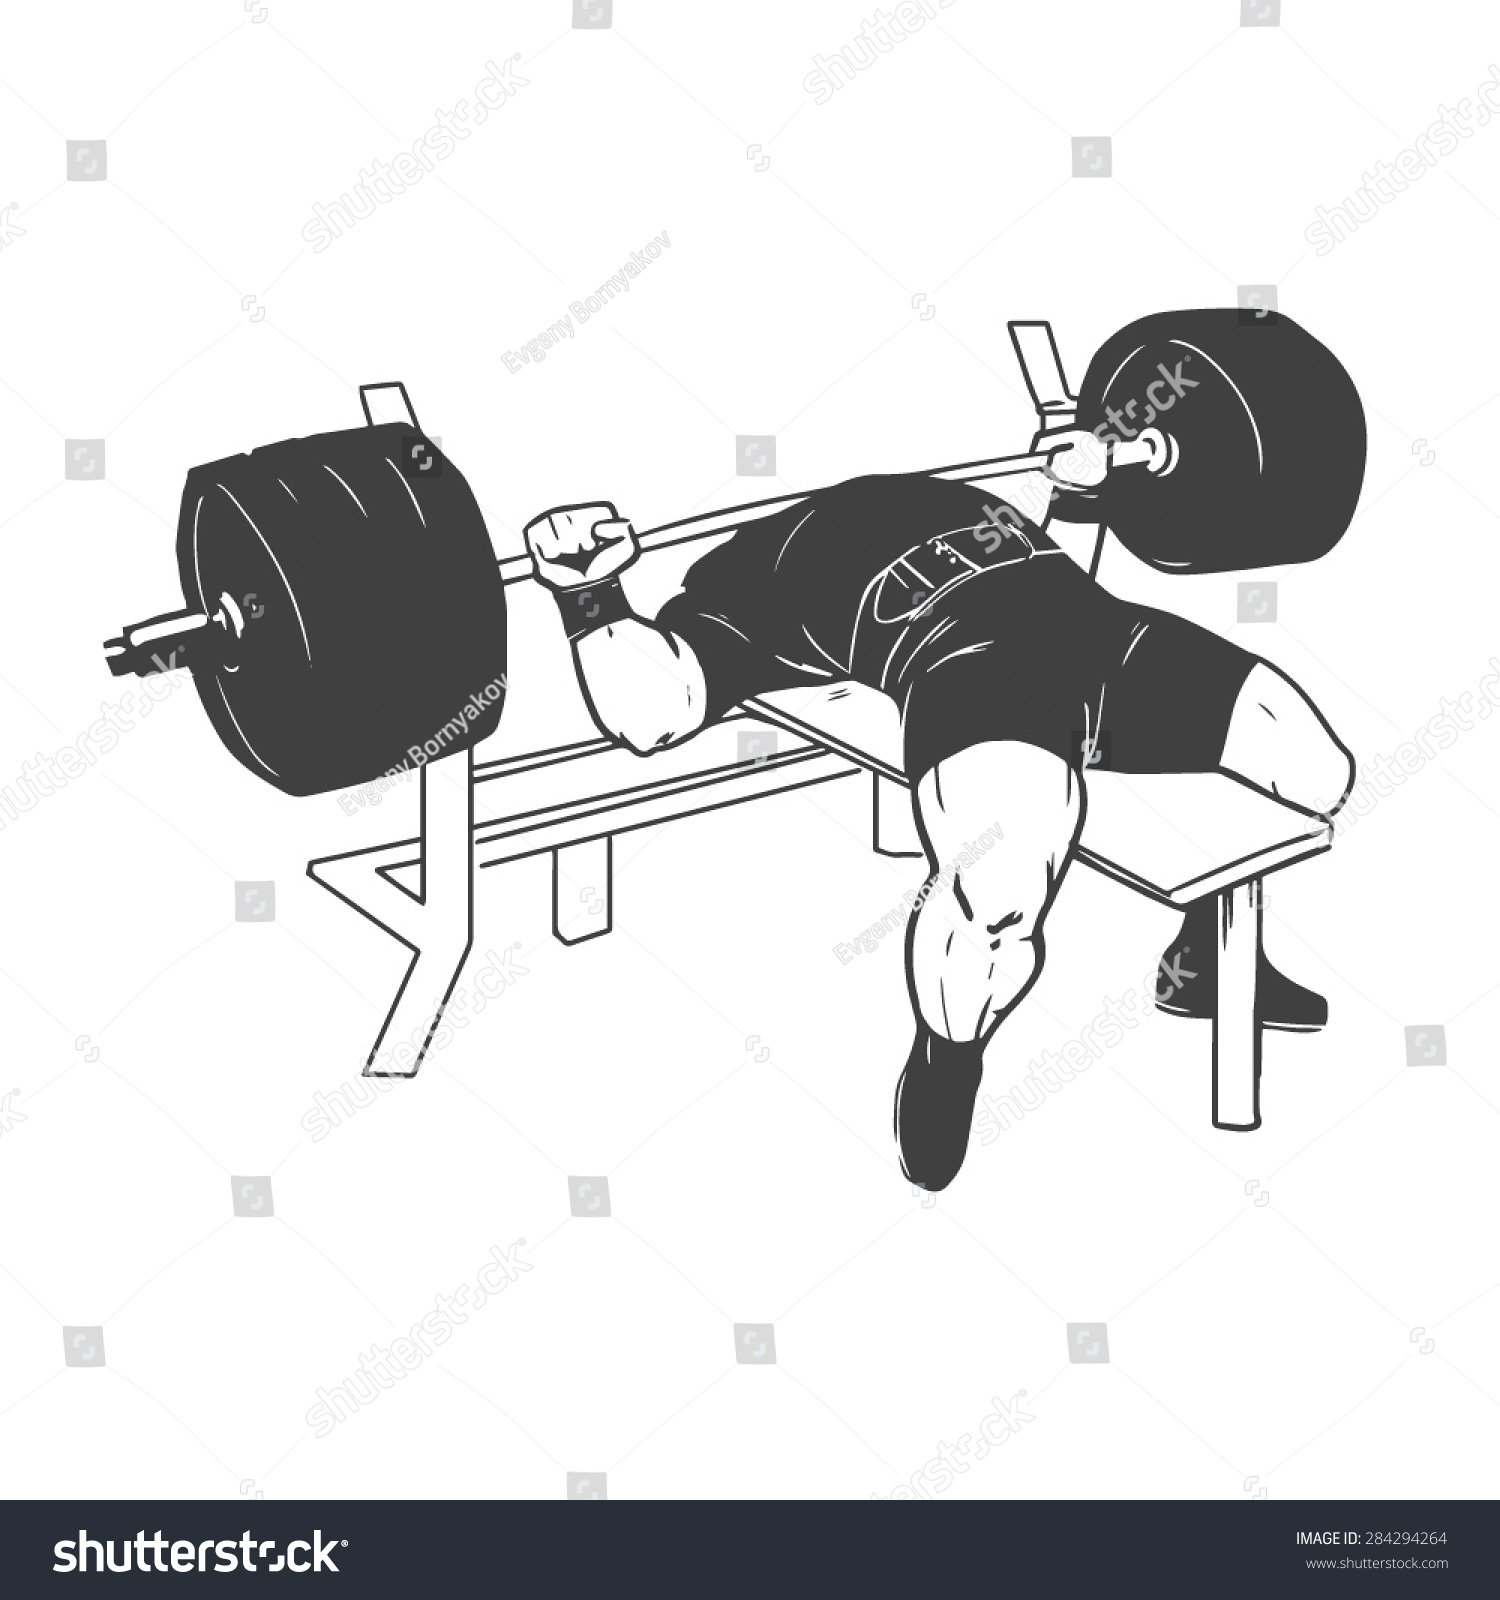 powerlifting clipart - photo #36